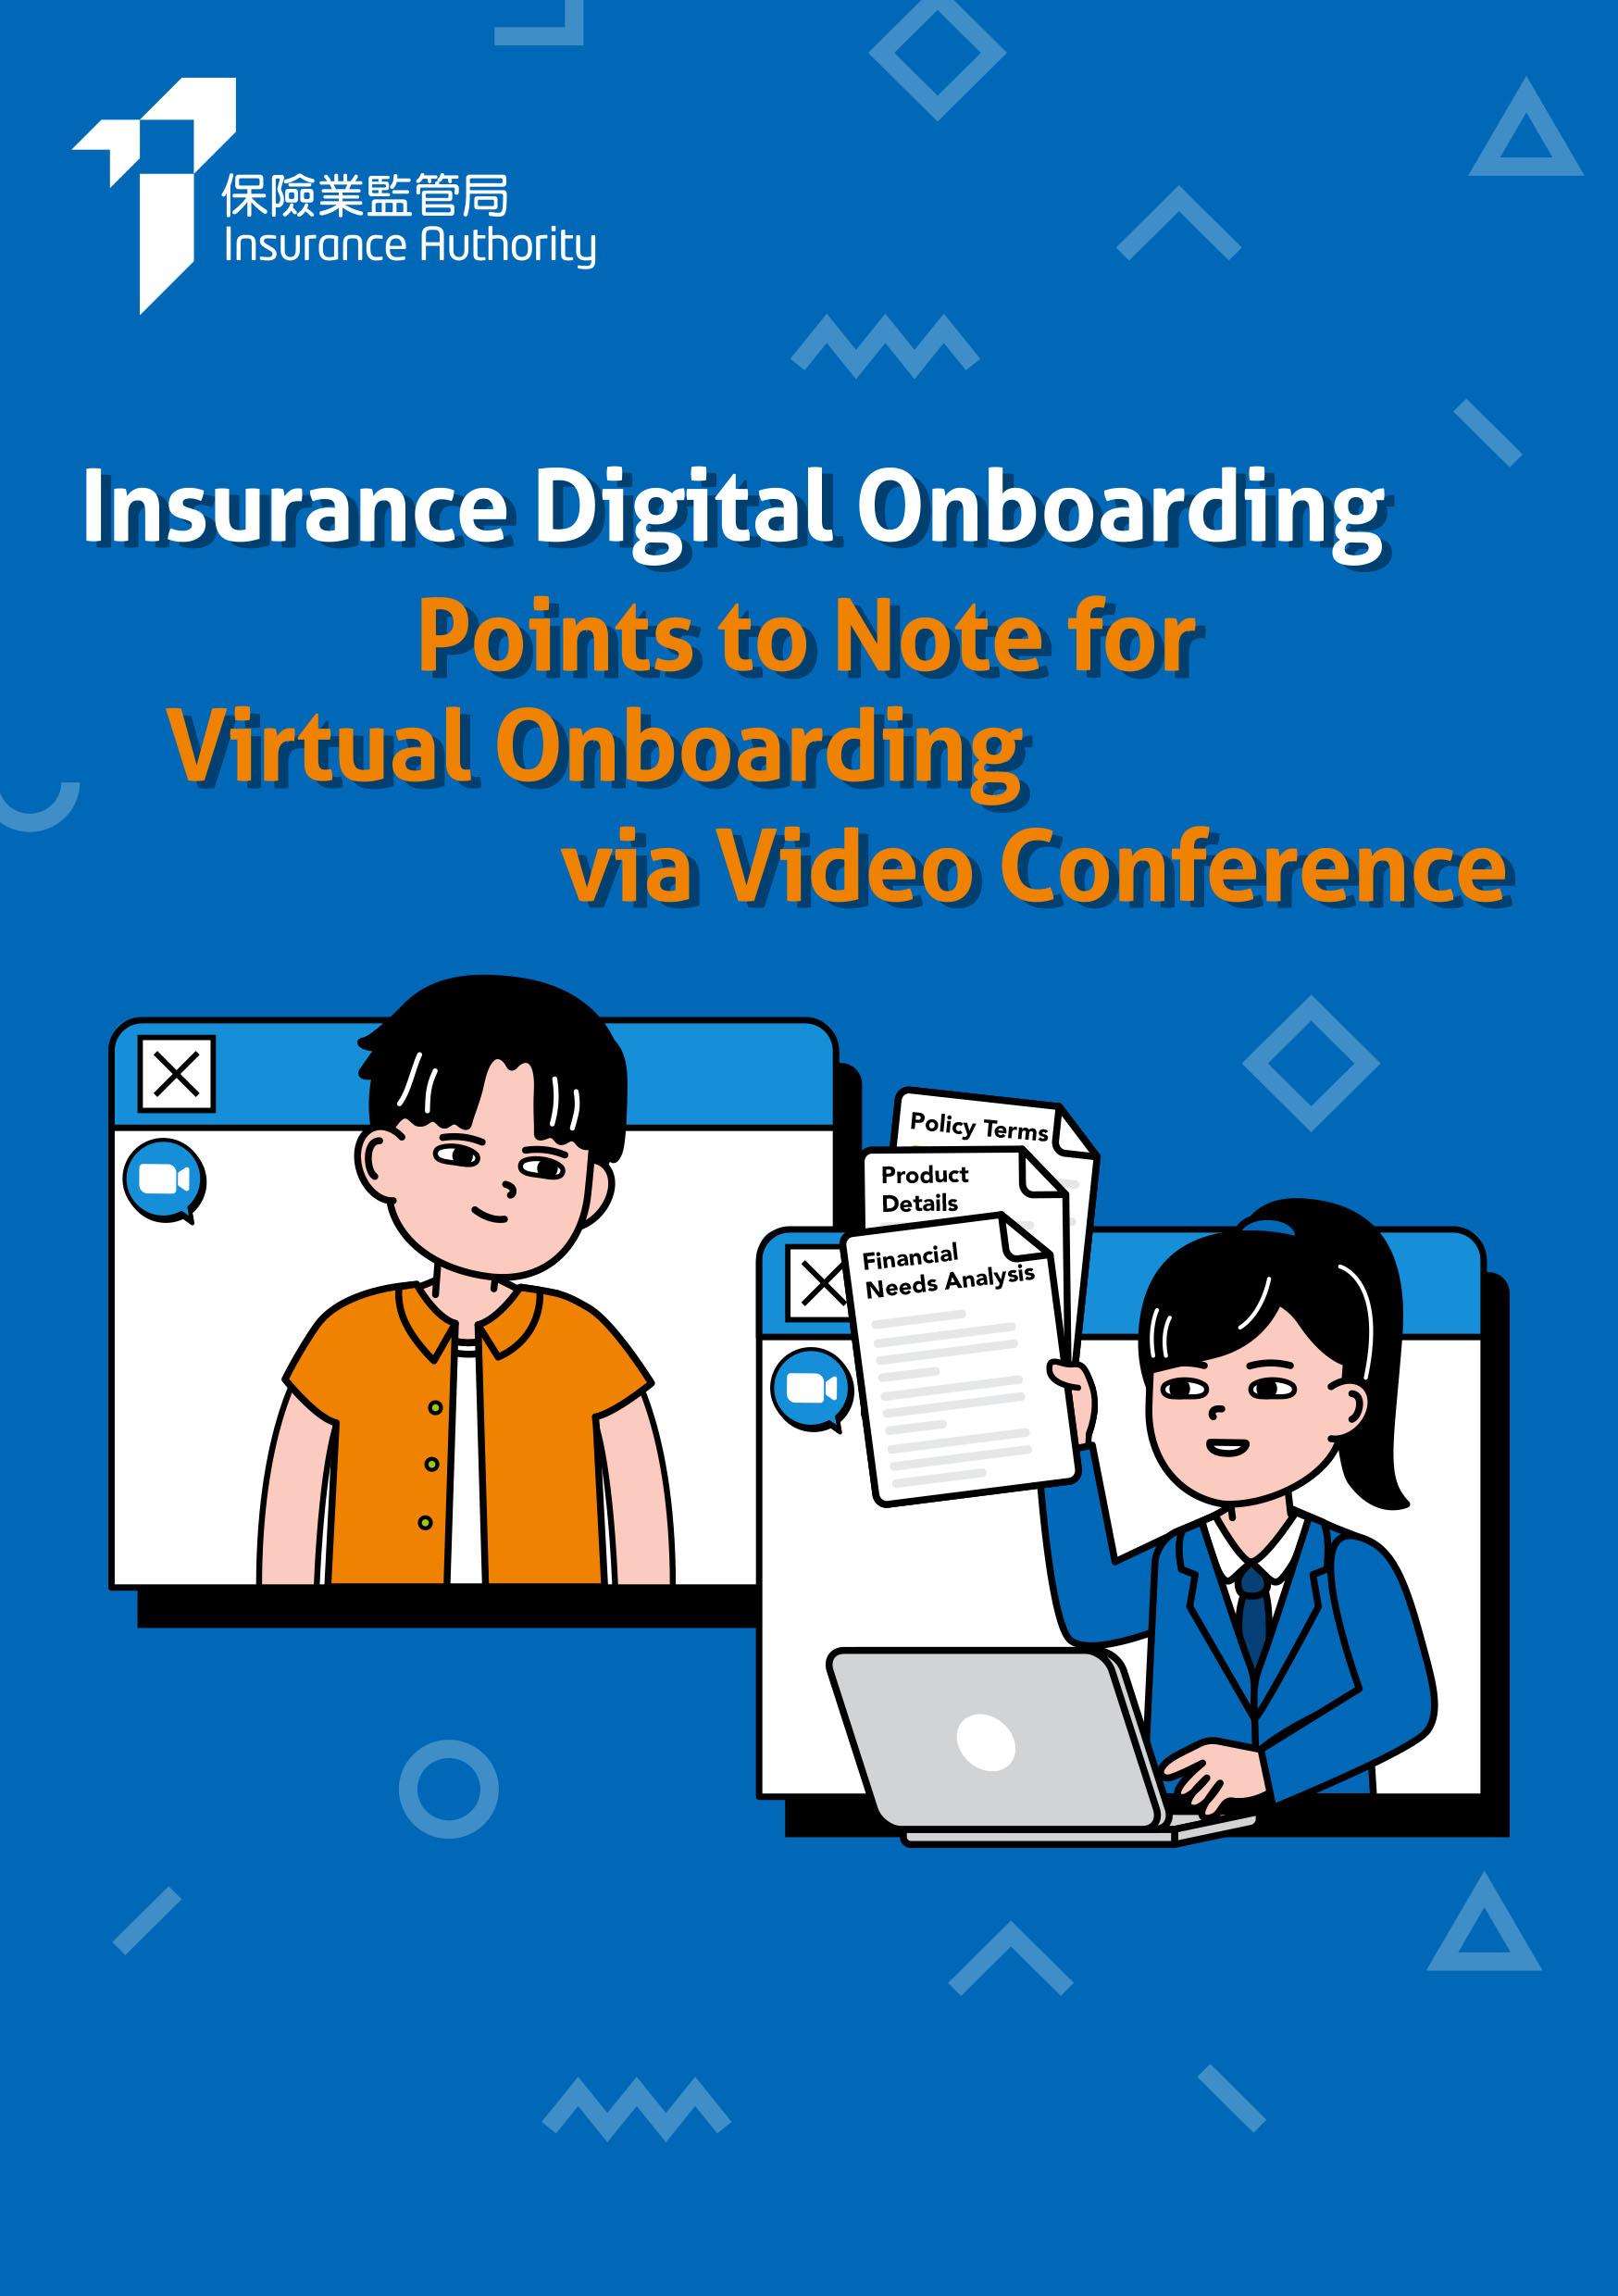 Insurance Digital Onboarding - Points to Note for Virtual Onboarding via video conference